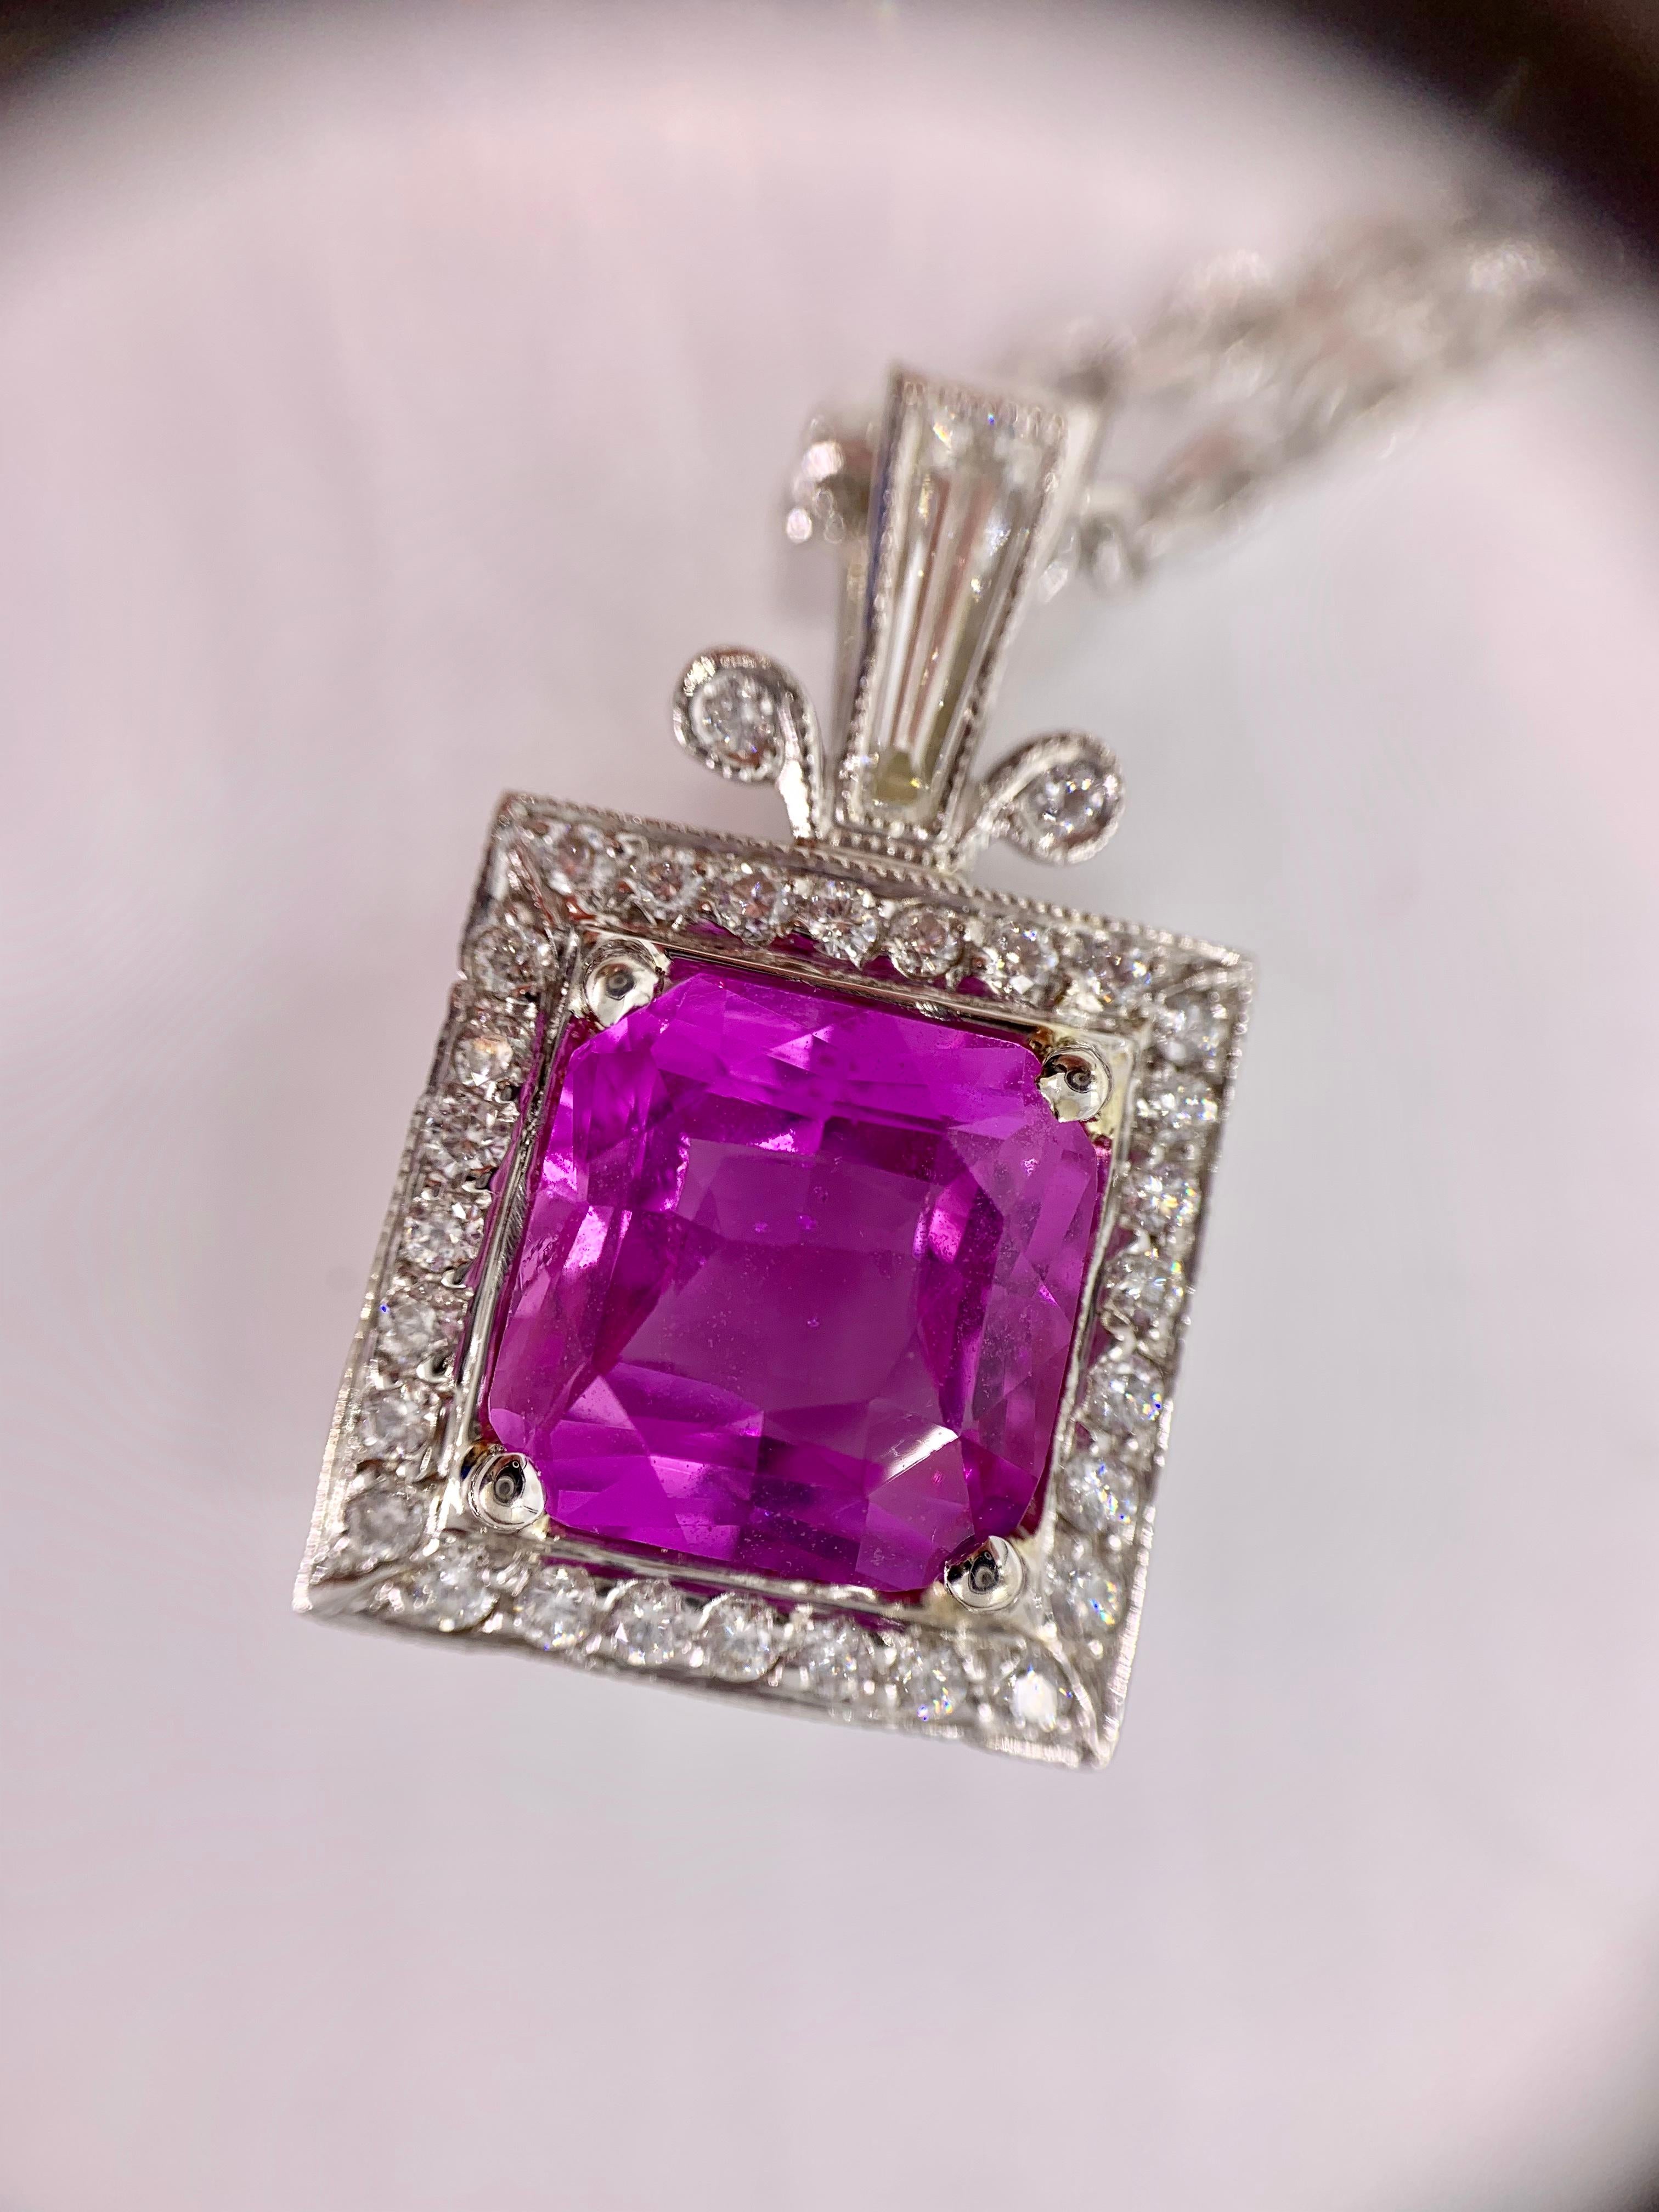 4.74 Carat Pink Sapphire and Diamond Pendant Necklace For Sale 1